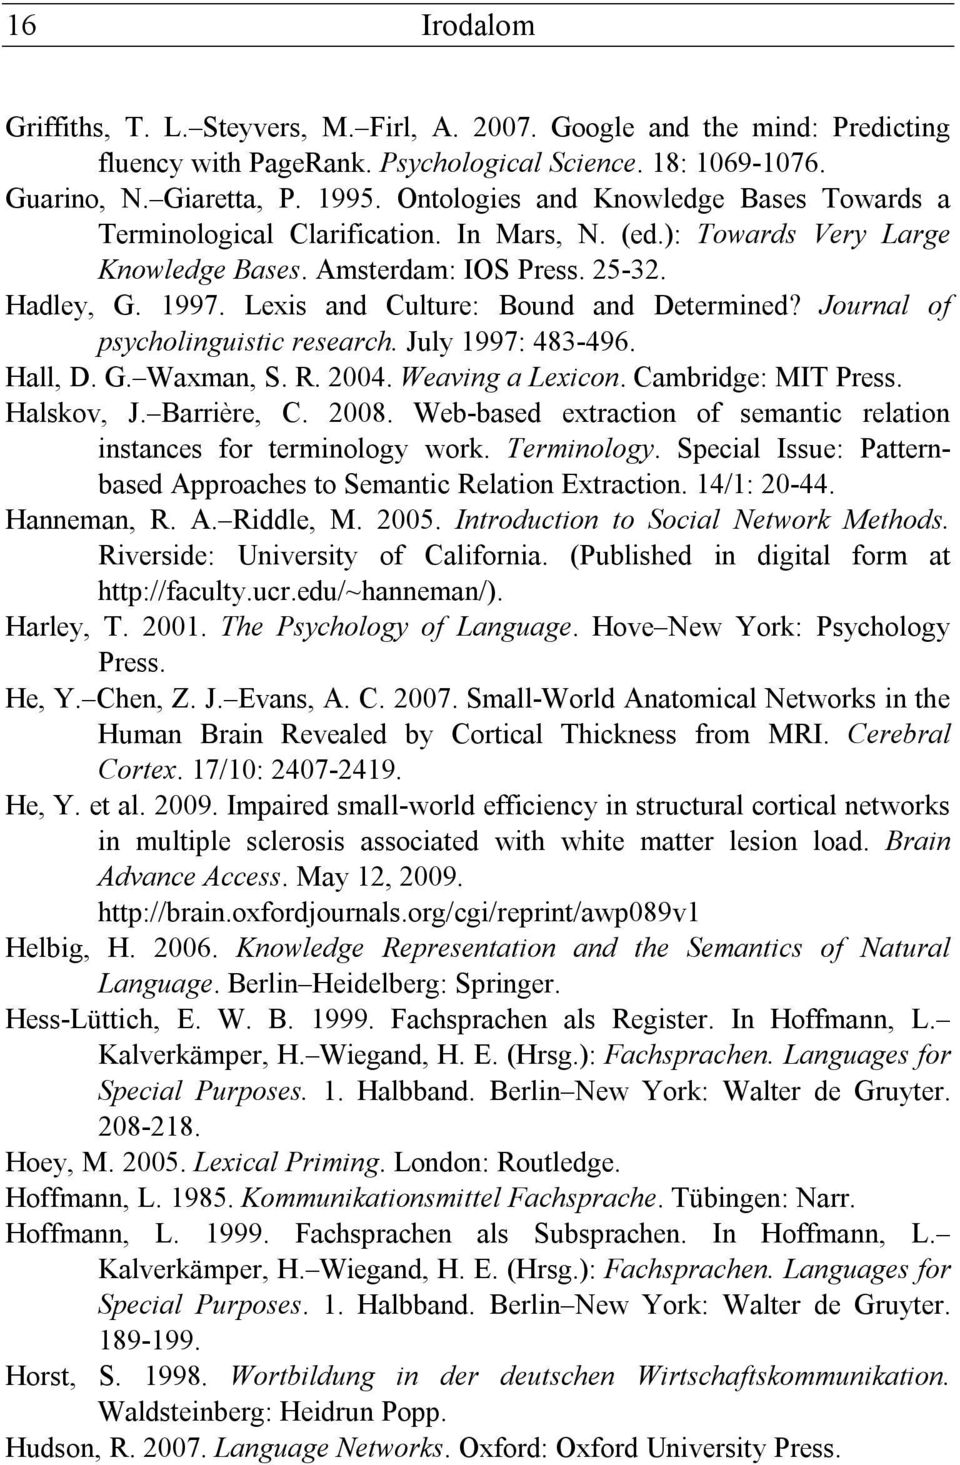 Lexis and Culture: Bound and Determined? Journal of psycholinguistic research. July 1997: 483-496. Hall, D. G. Waxman, S. R. 2004. Weaving a Lexicon. Cambridge: MIT Press. Halskov, J. Barrière, C.